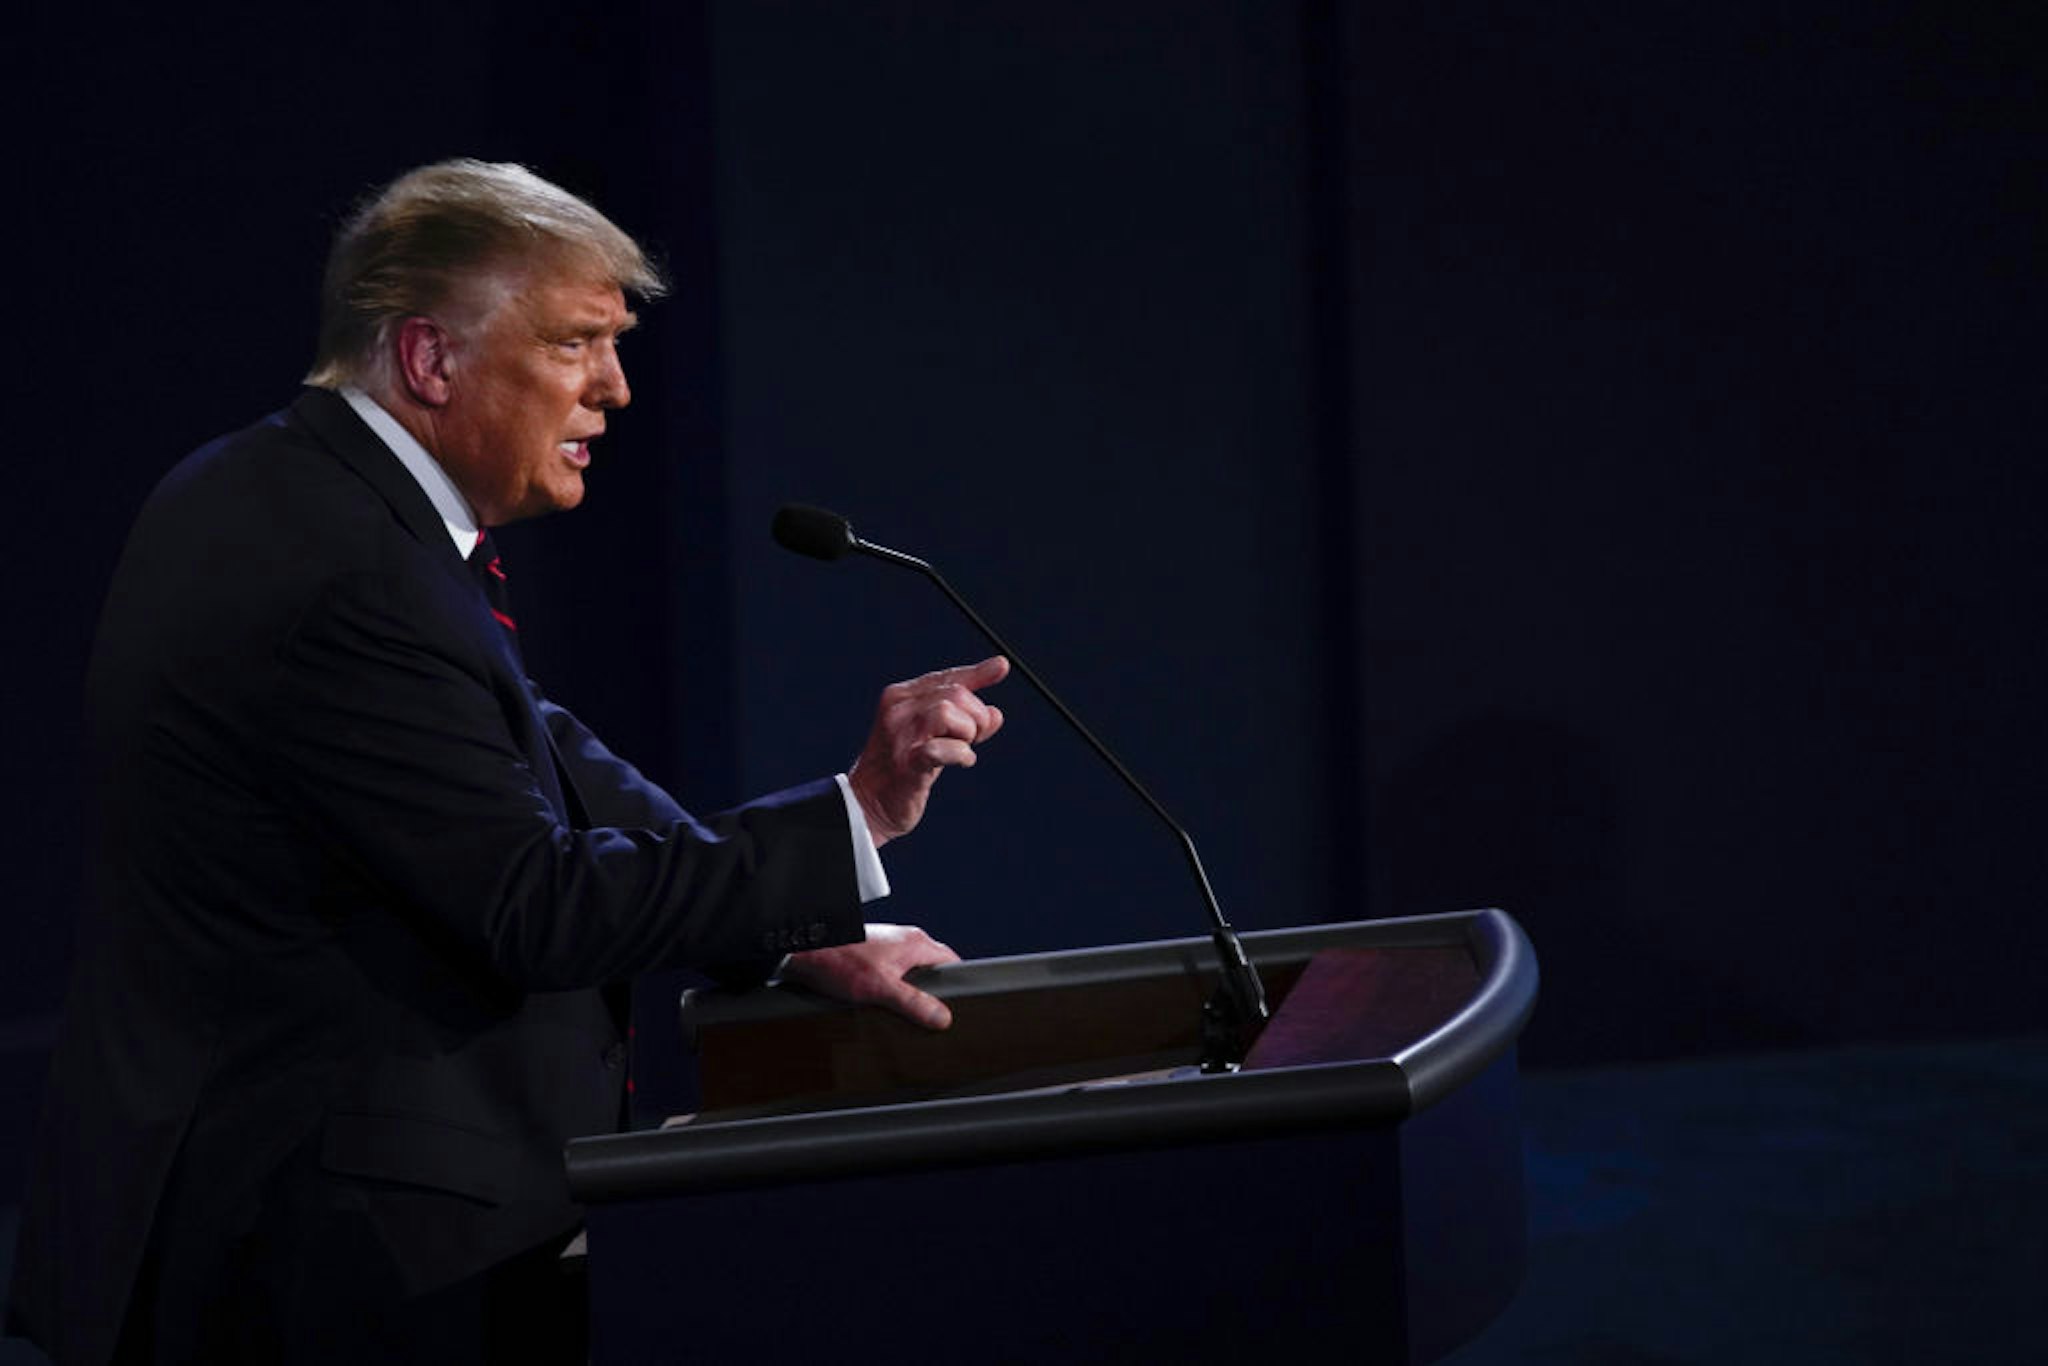 U.S. President Donald Trump speaks during the first U.S. presidential debate hosted by Case Western Reserve University and the Cleveland Clinic in Cleveland, Ohio, U.S., on Tuesday, Sept. 29, 2020.